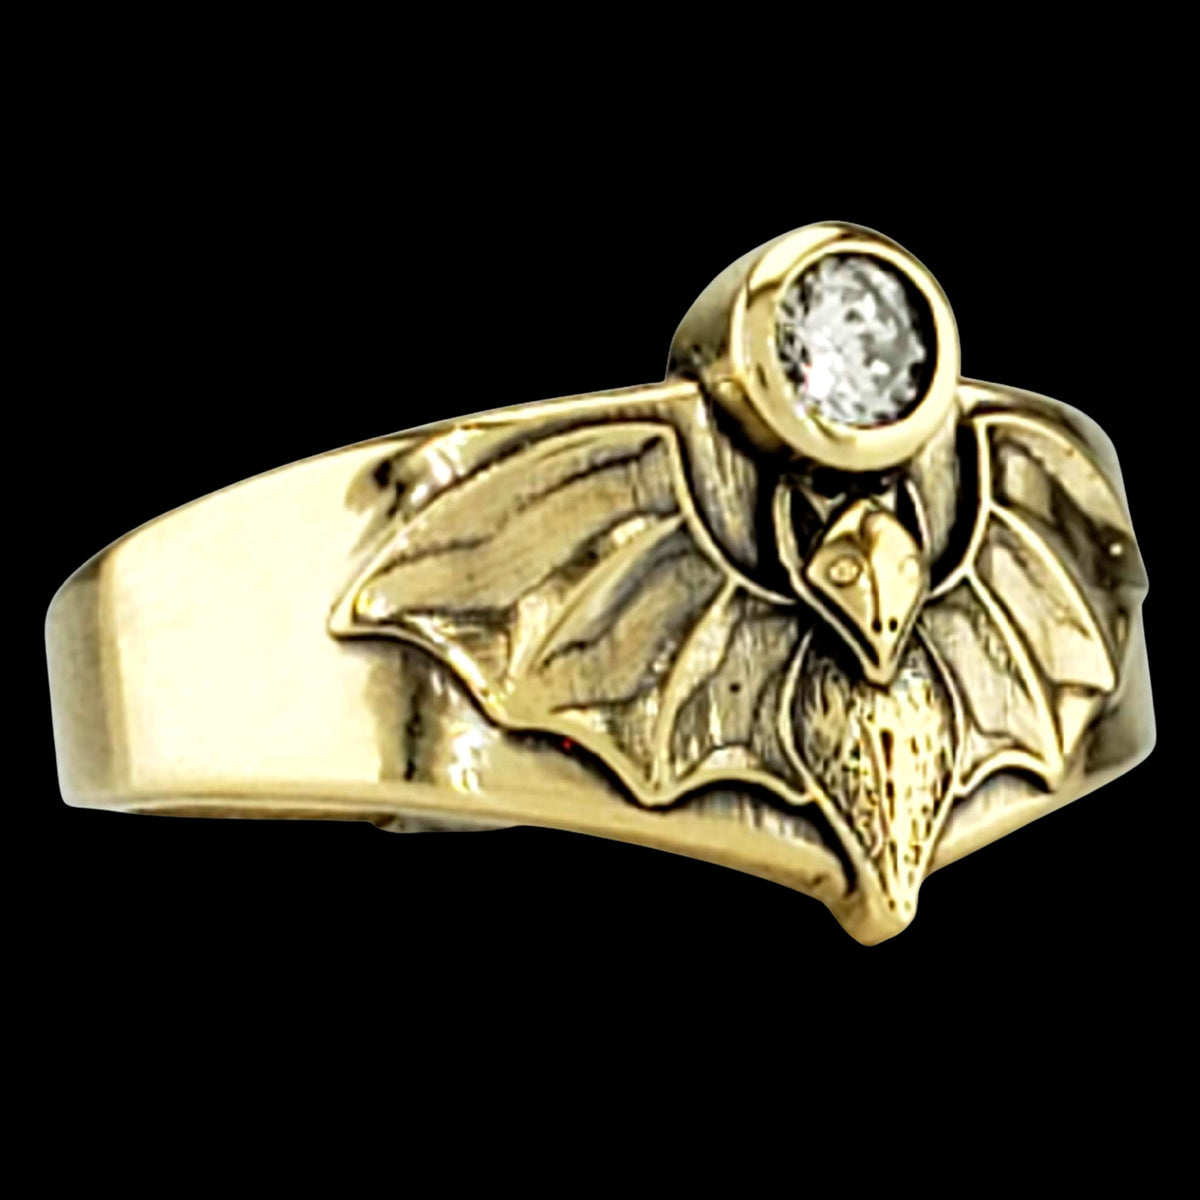 ELEGANT BAT SOLITAIRE Tapered Ring in GOLD with CHOICE of 1/4CT GEMSTONE - Starting at $399